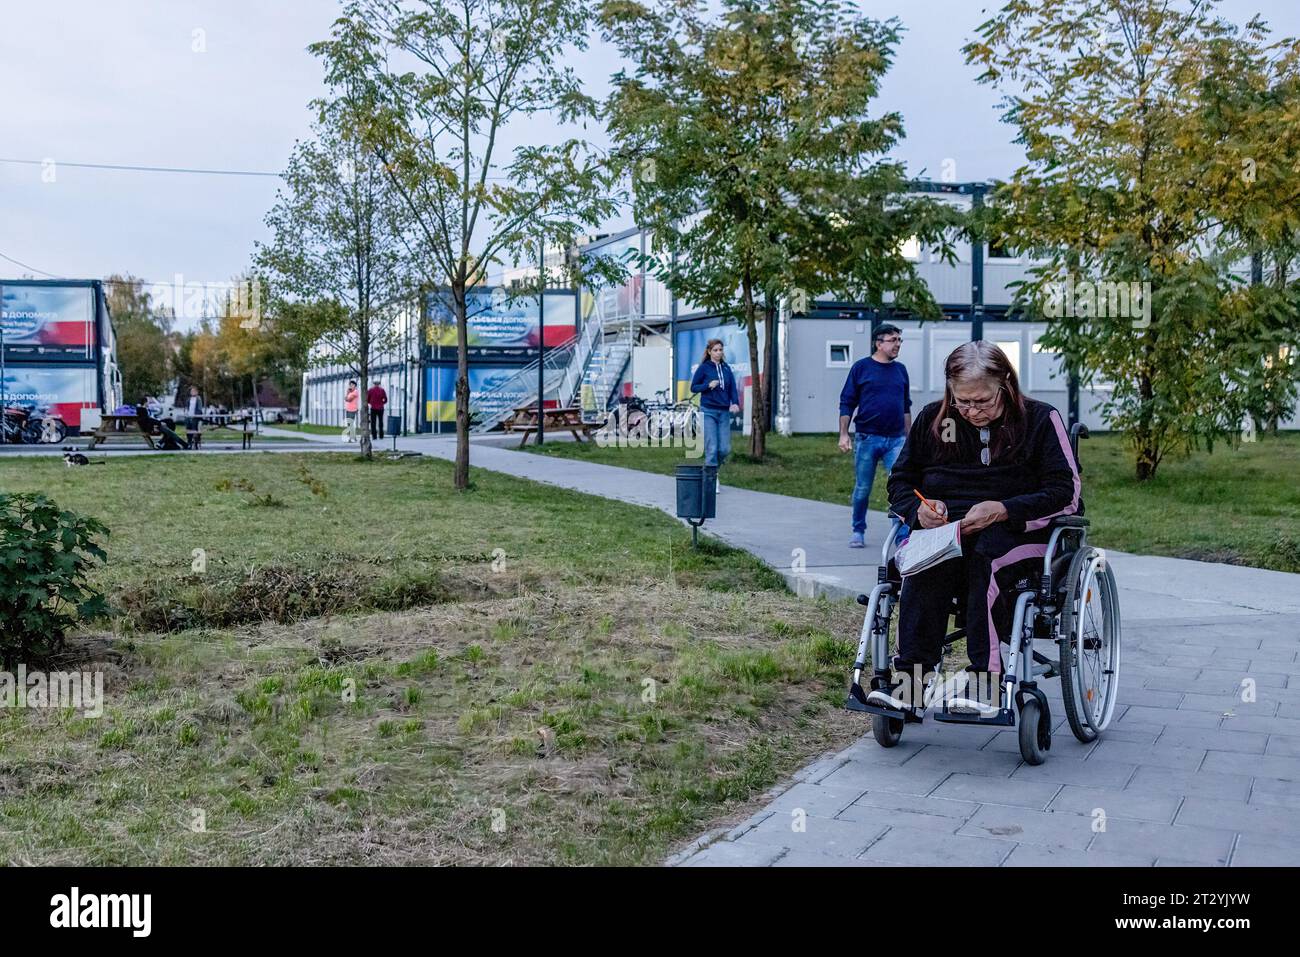 A disable refugee is seen on the road leading to the modular housing complex for internal displaced refugees in a residential area in Lviv. Modular housing settlement for refugee, facilitated by Warsaw University of Technology and the Polish government, are built in a residential area in Lviv as a prototype settlement including social infrastructure, based on replicable elements at micro, mezzo, and macro scales, to host approximately 3500 people displaced internally in Ukraine due to the Russian-Ukrainian War. (Photo by Hesther Ng/SOPA Images/Sipa USA) Stock Photo